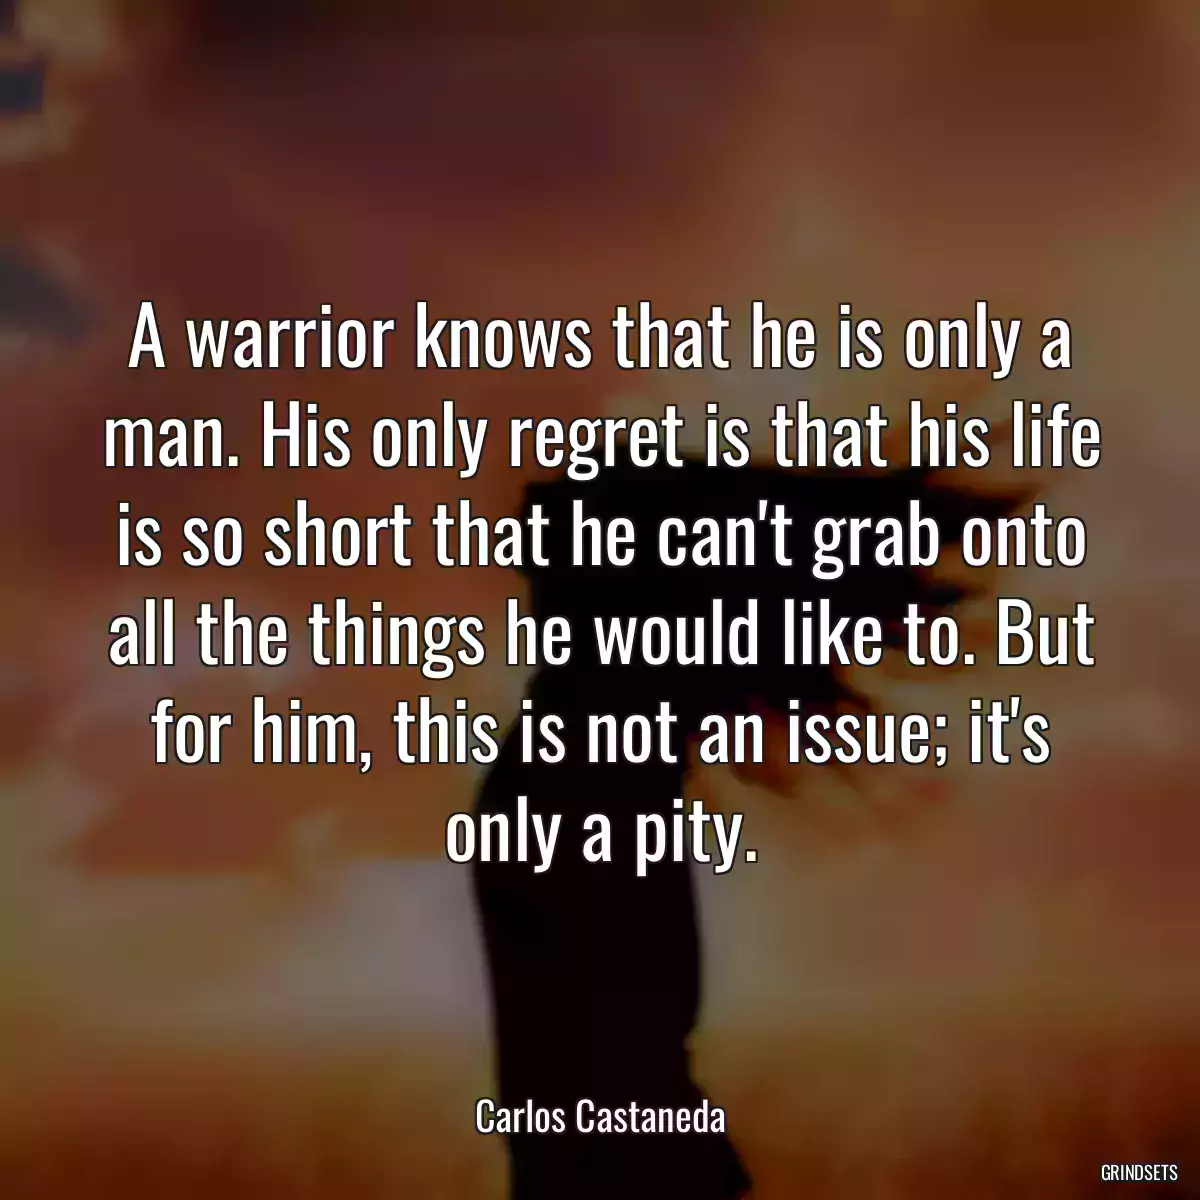 A warrior knows that he is only a man. His only regret is that his life is so short that he can\'t grab onto all the things he would like to. But for him, this is not an issue; it\'s only a pity.